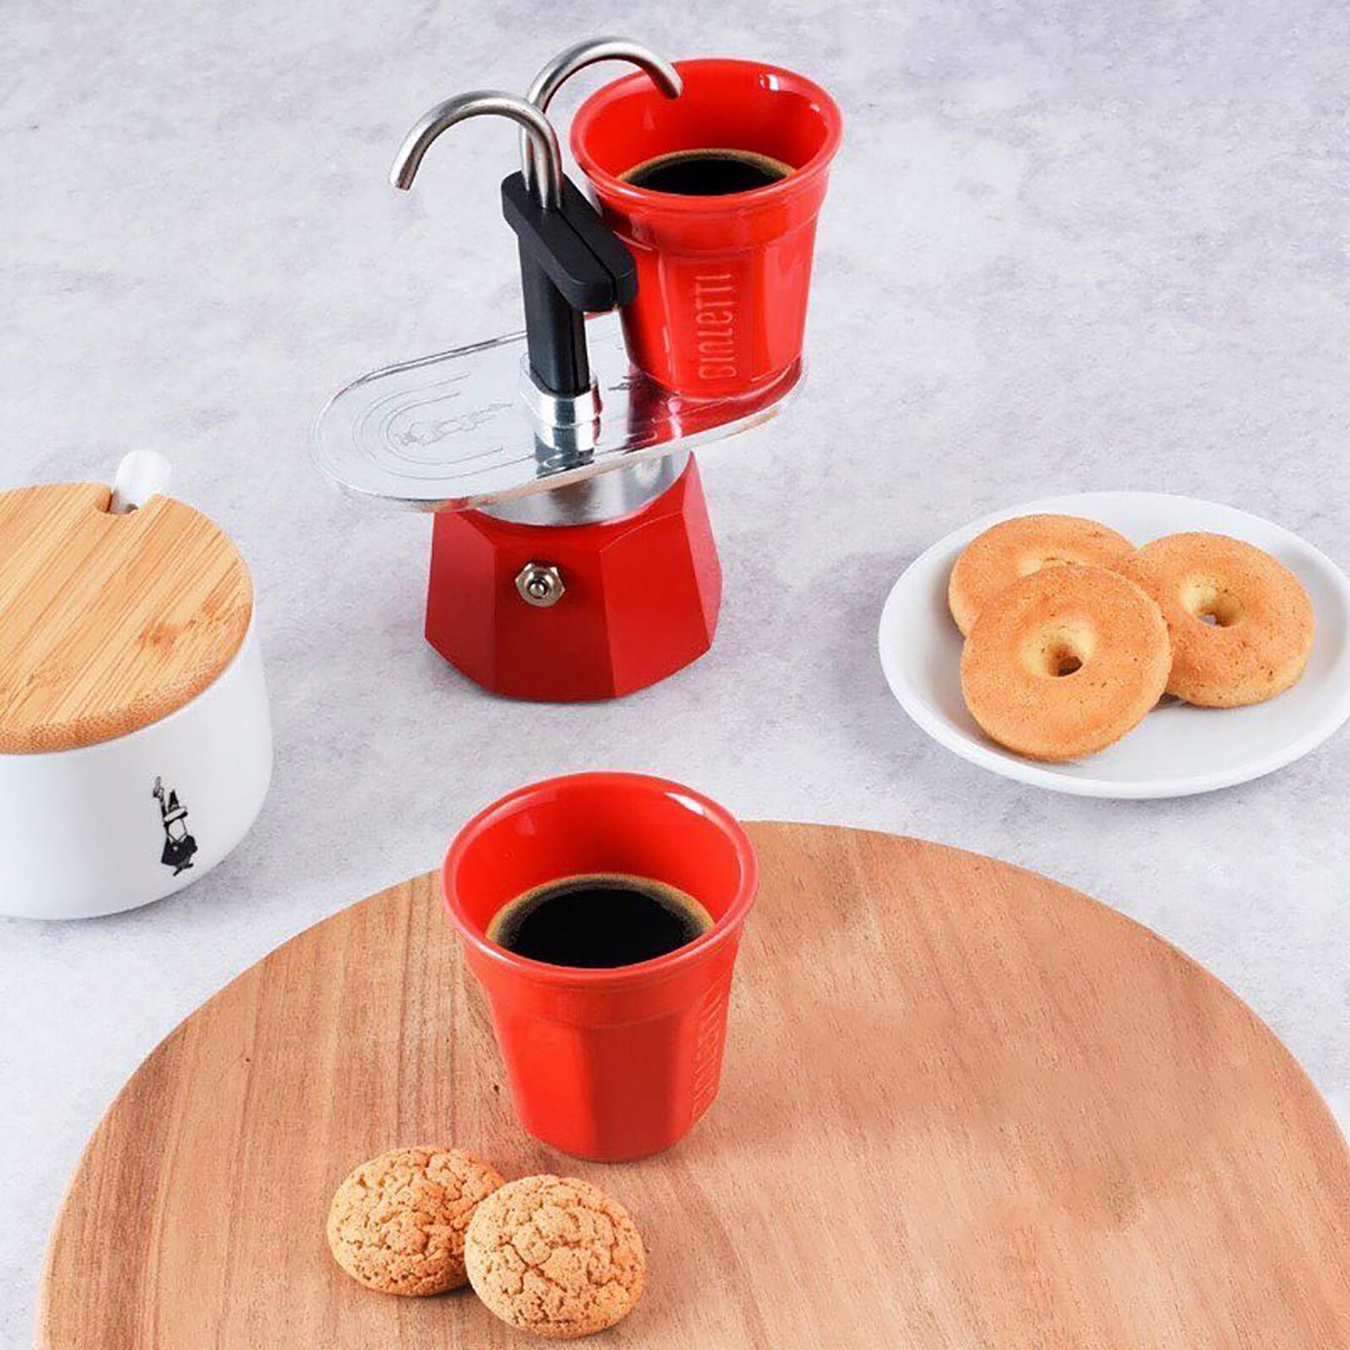 https://www.thedesigngiftshop.com/product_images/uploaded_images/bialetti-mini-express-red-cups-9-3.jpg